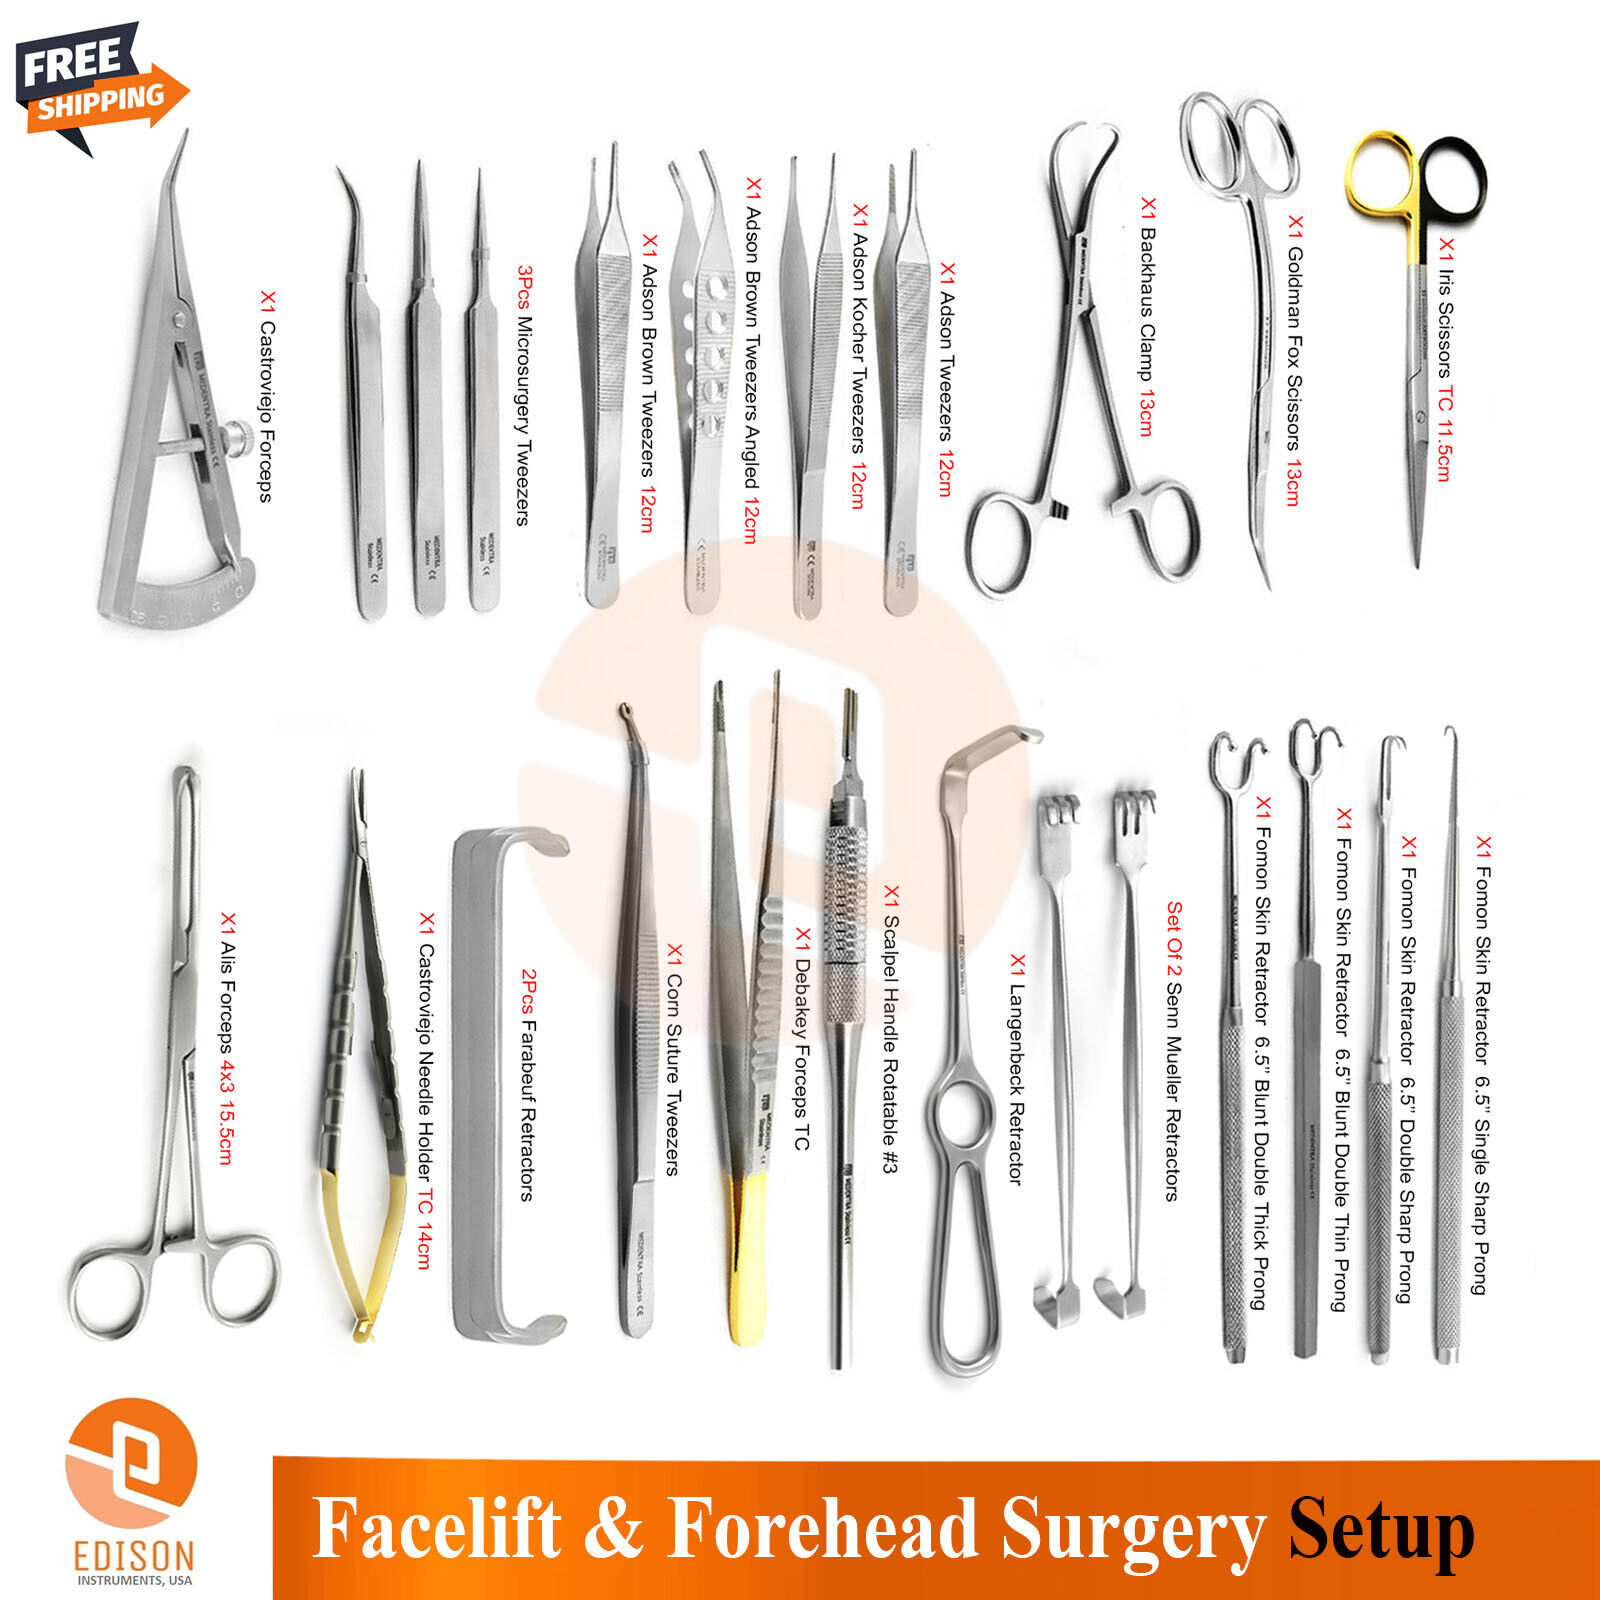 Facelift Plastic Surgery Kit Forehead Microsurgery Surgical Instruments Set